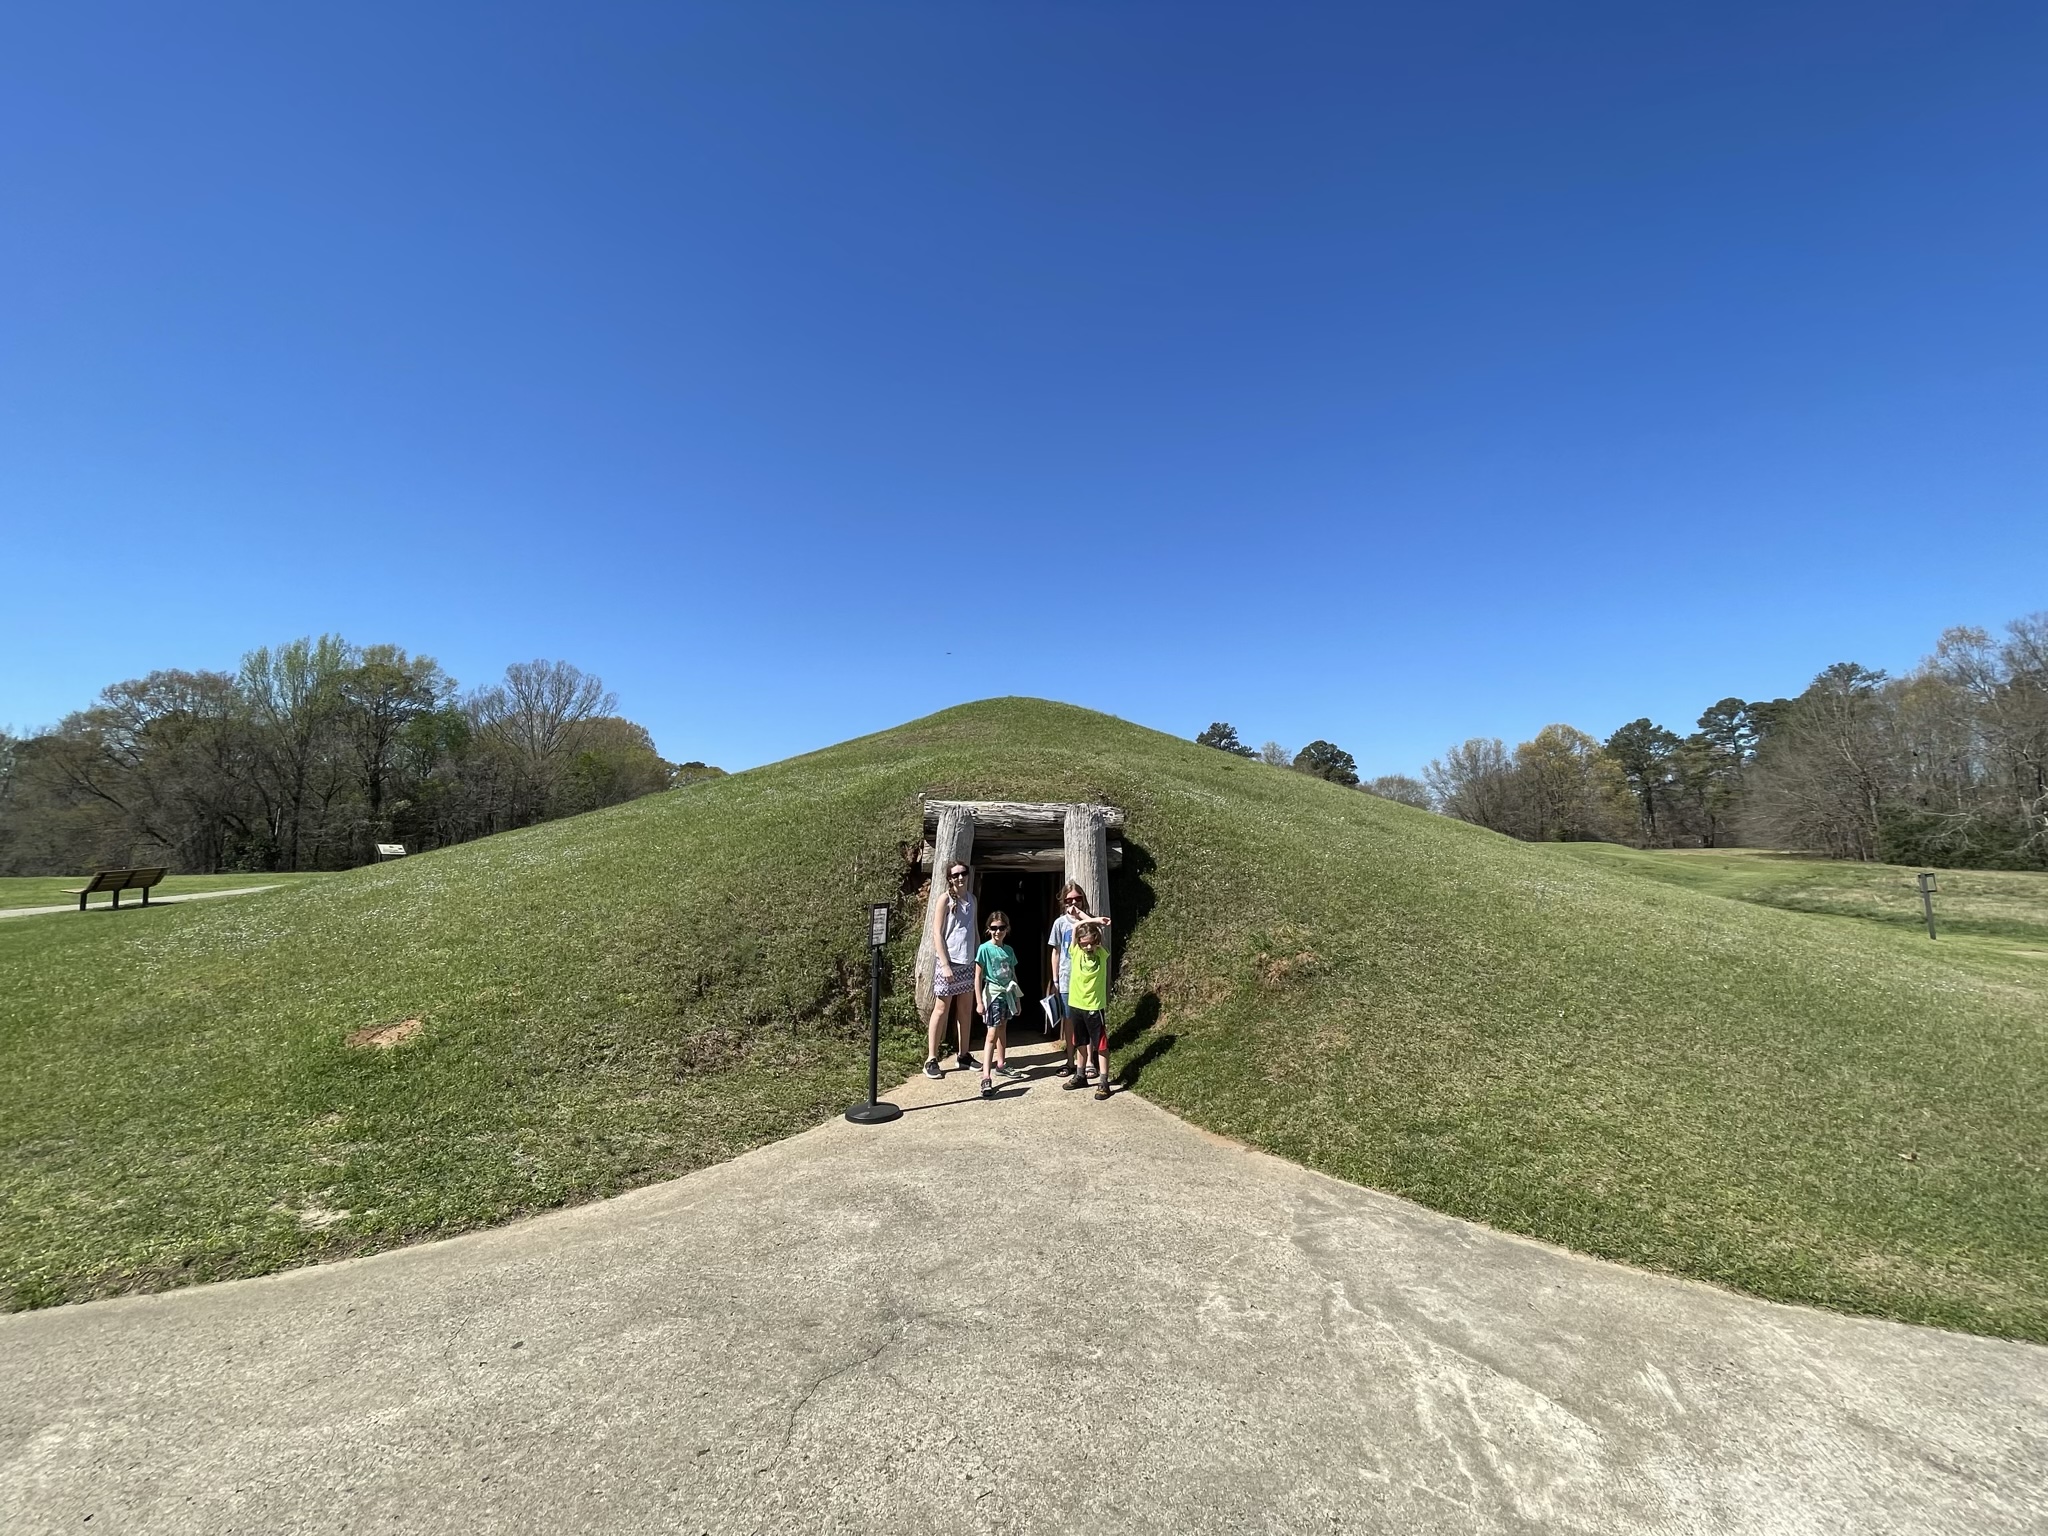 A photo of Rayleigh, Ainsley, Dillon, and Grayson standing in front of the wood framed entrance to an underground structure with a grassy mound forming its roof